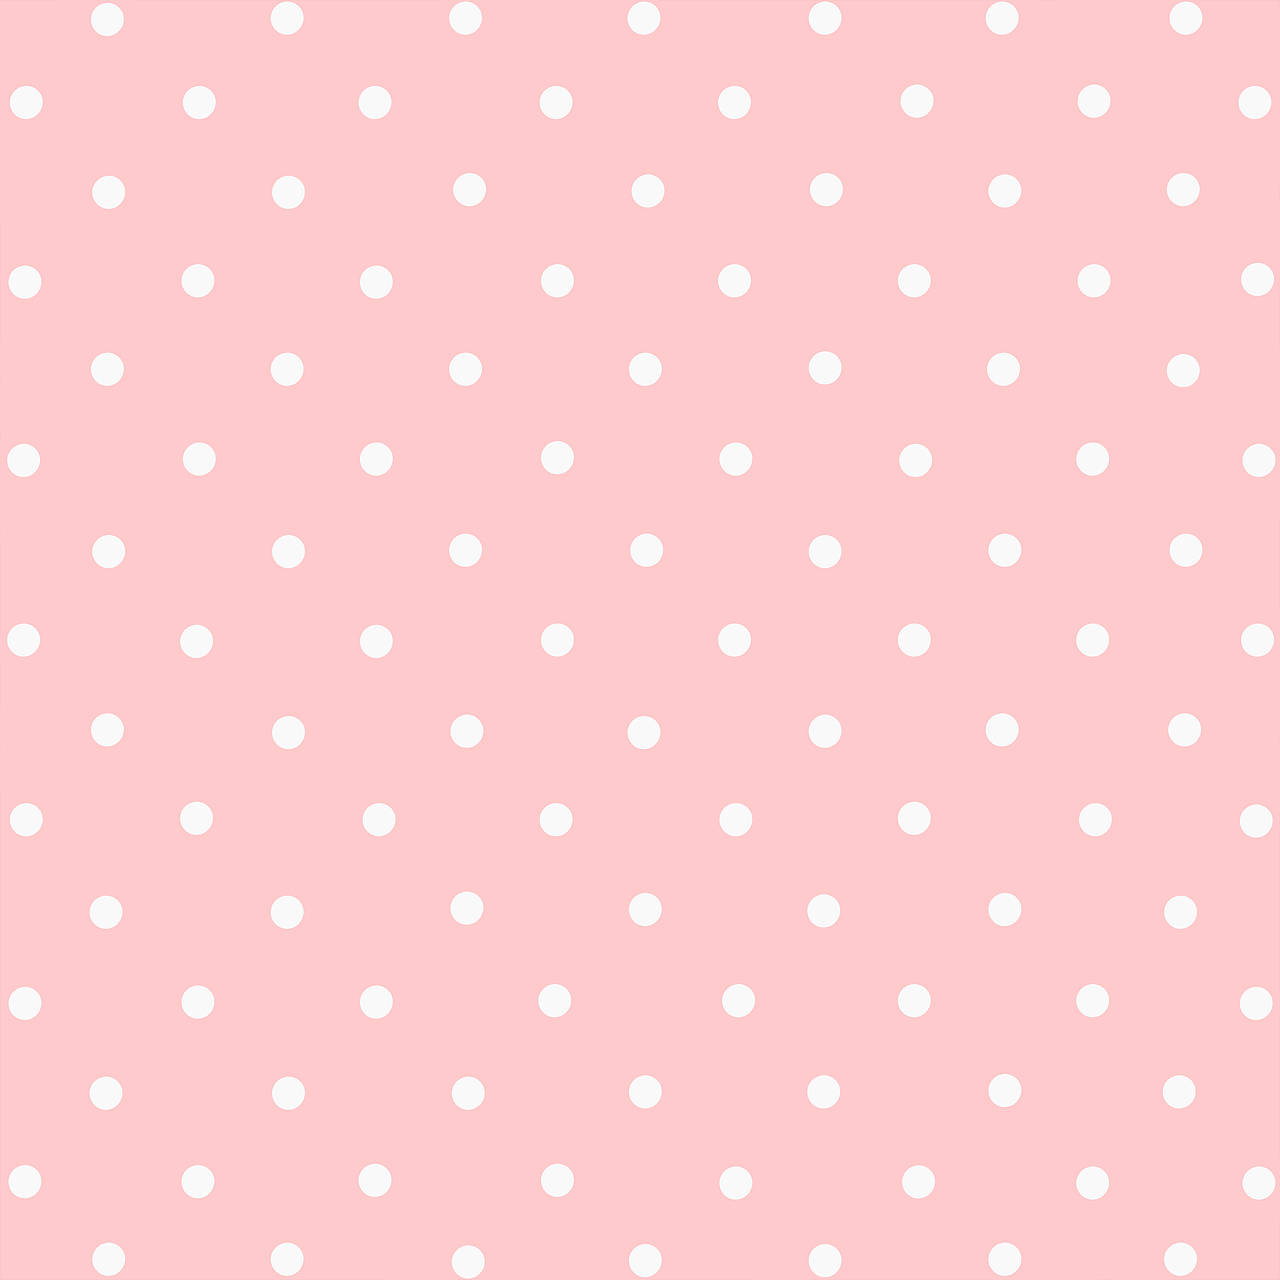 1280X1280 Polka Dot Wallpaper and Background